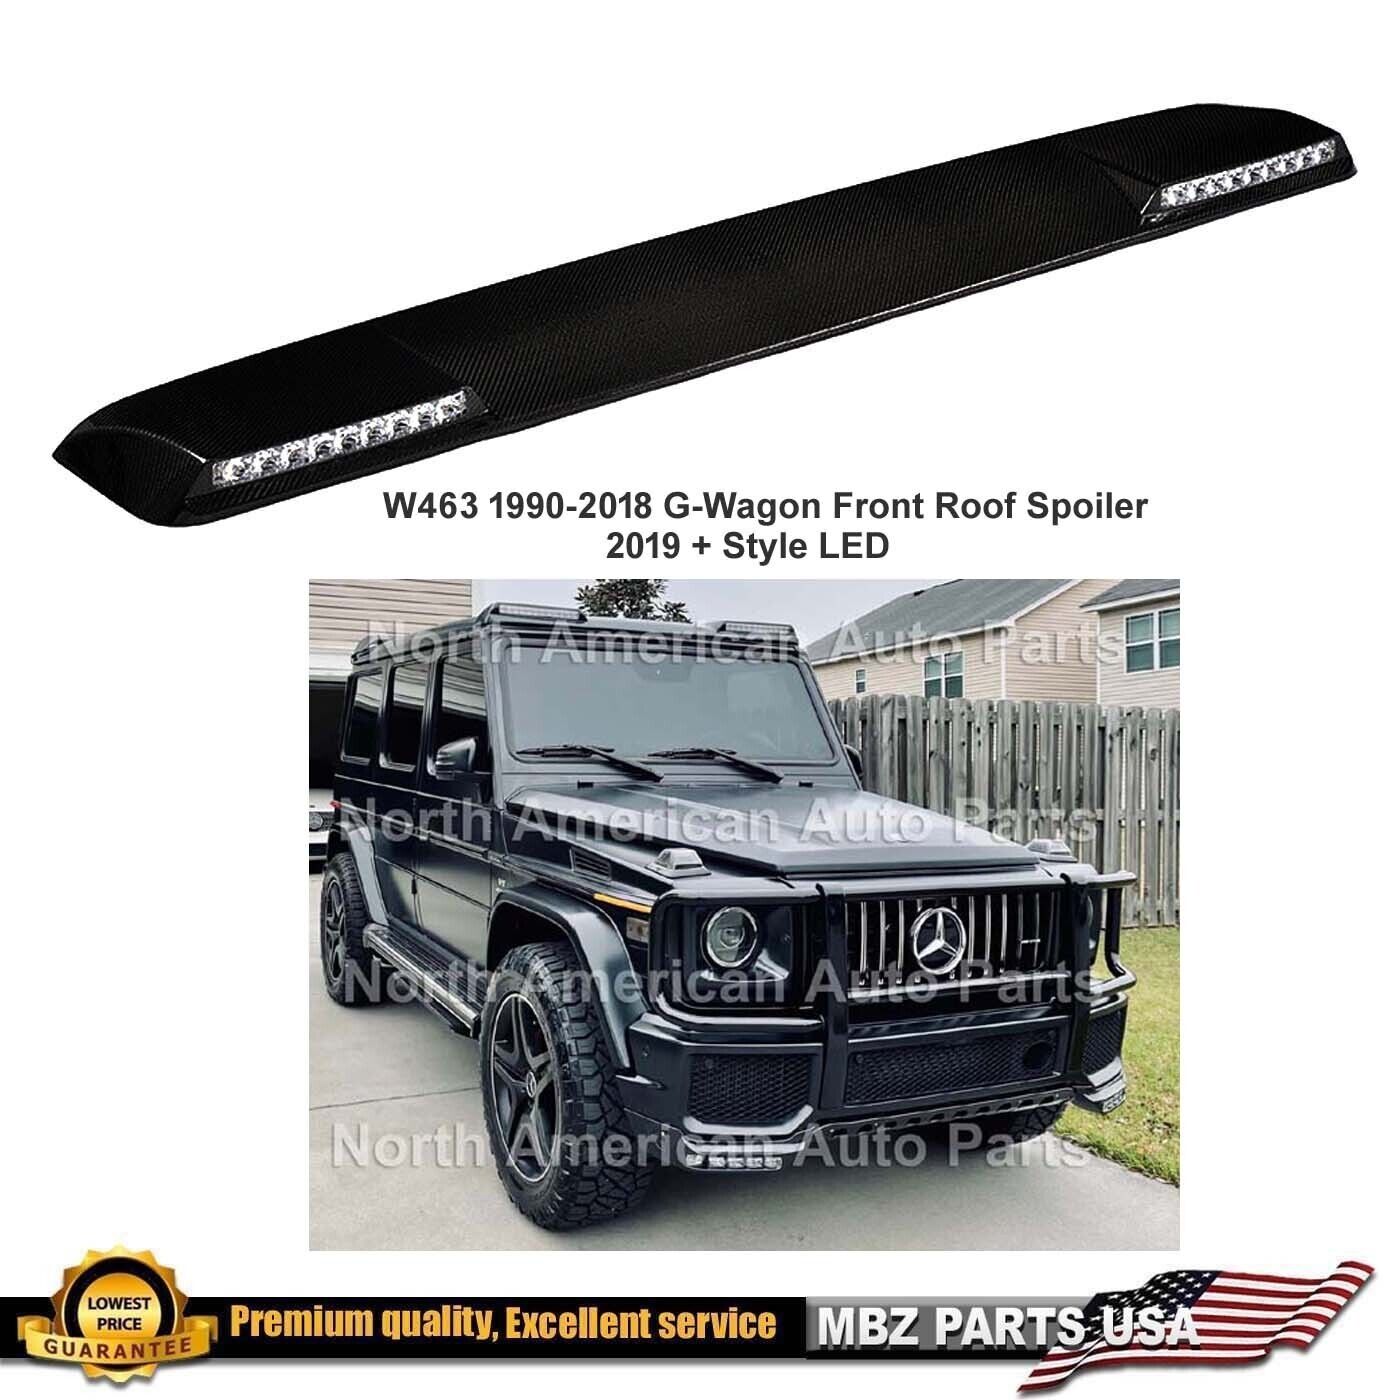 G63 Front Roof Spoiler Led W463 1990-2018 G500 G550 Brabus AMG Wing Parts